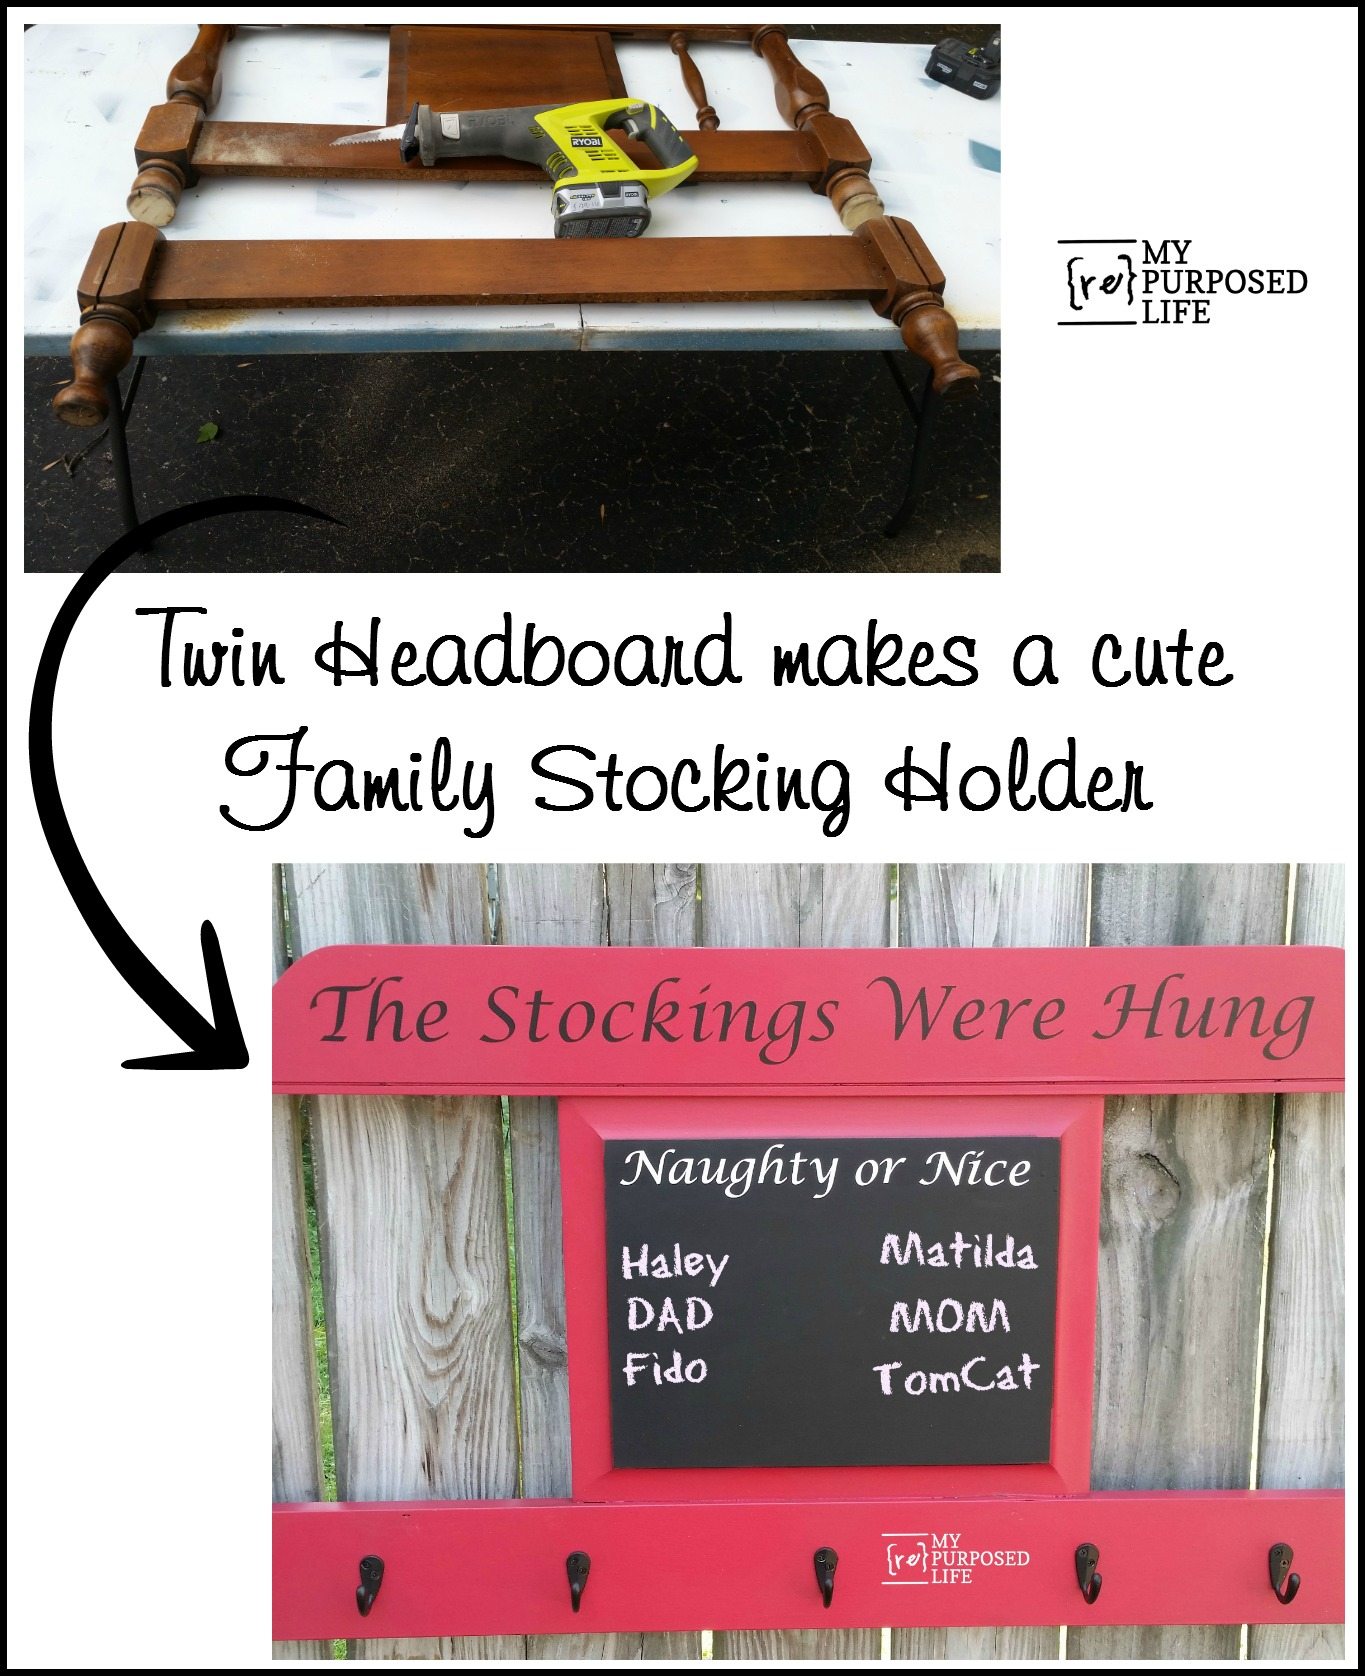 Make a Christmas stocking holder and chalkboard out of an old headboard. With a built-in naughty and nice list chalkboard. Repurposed headboard ideas. MyRepurposedLife.com